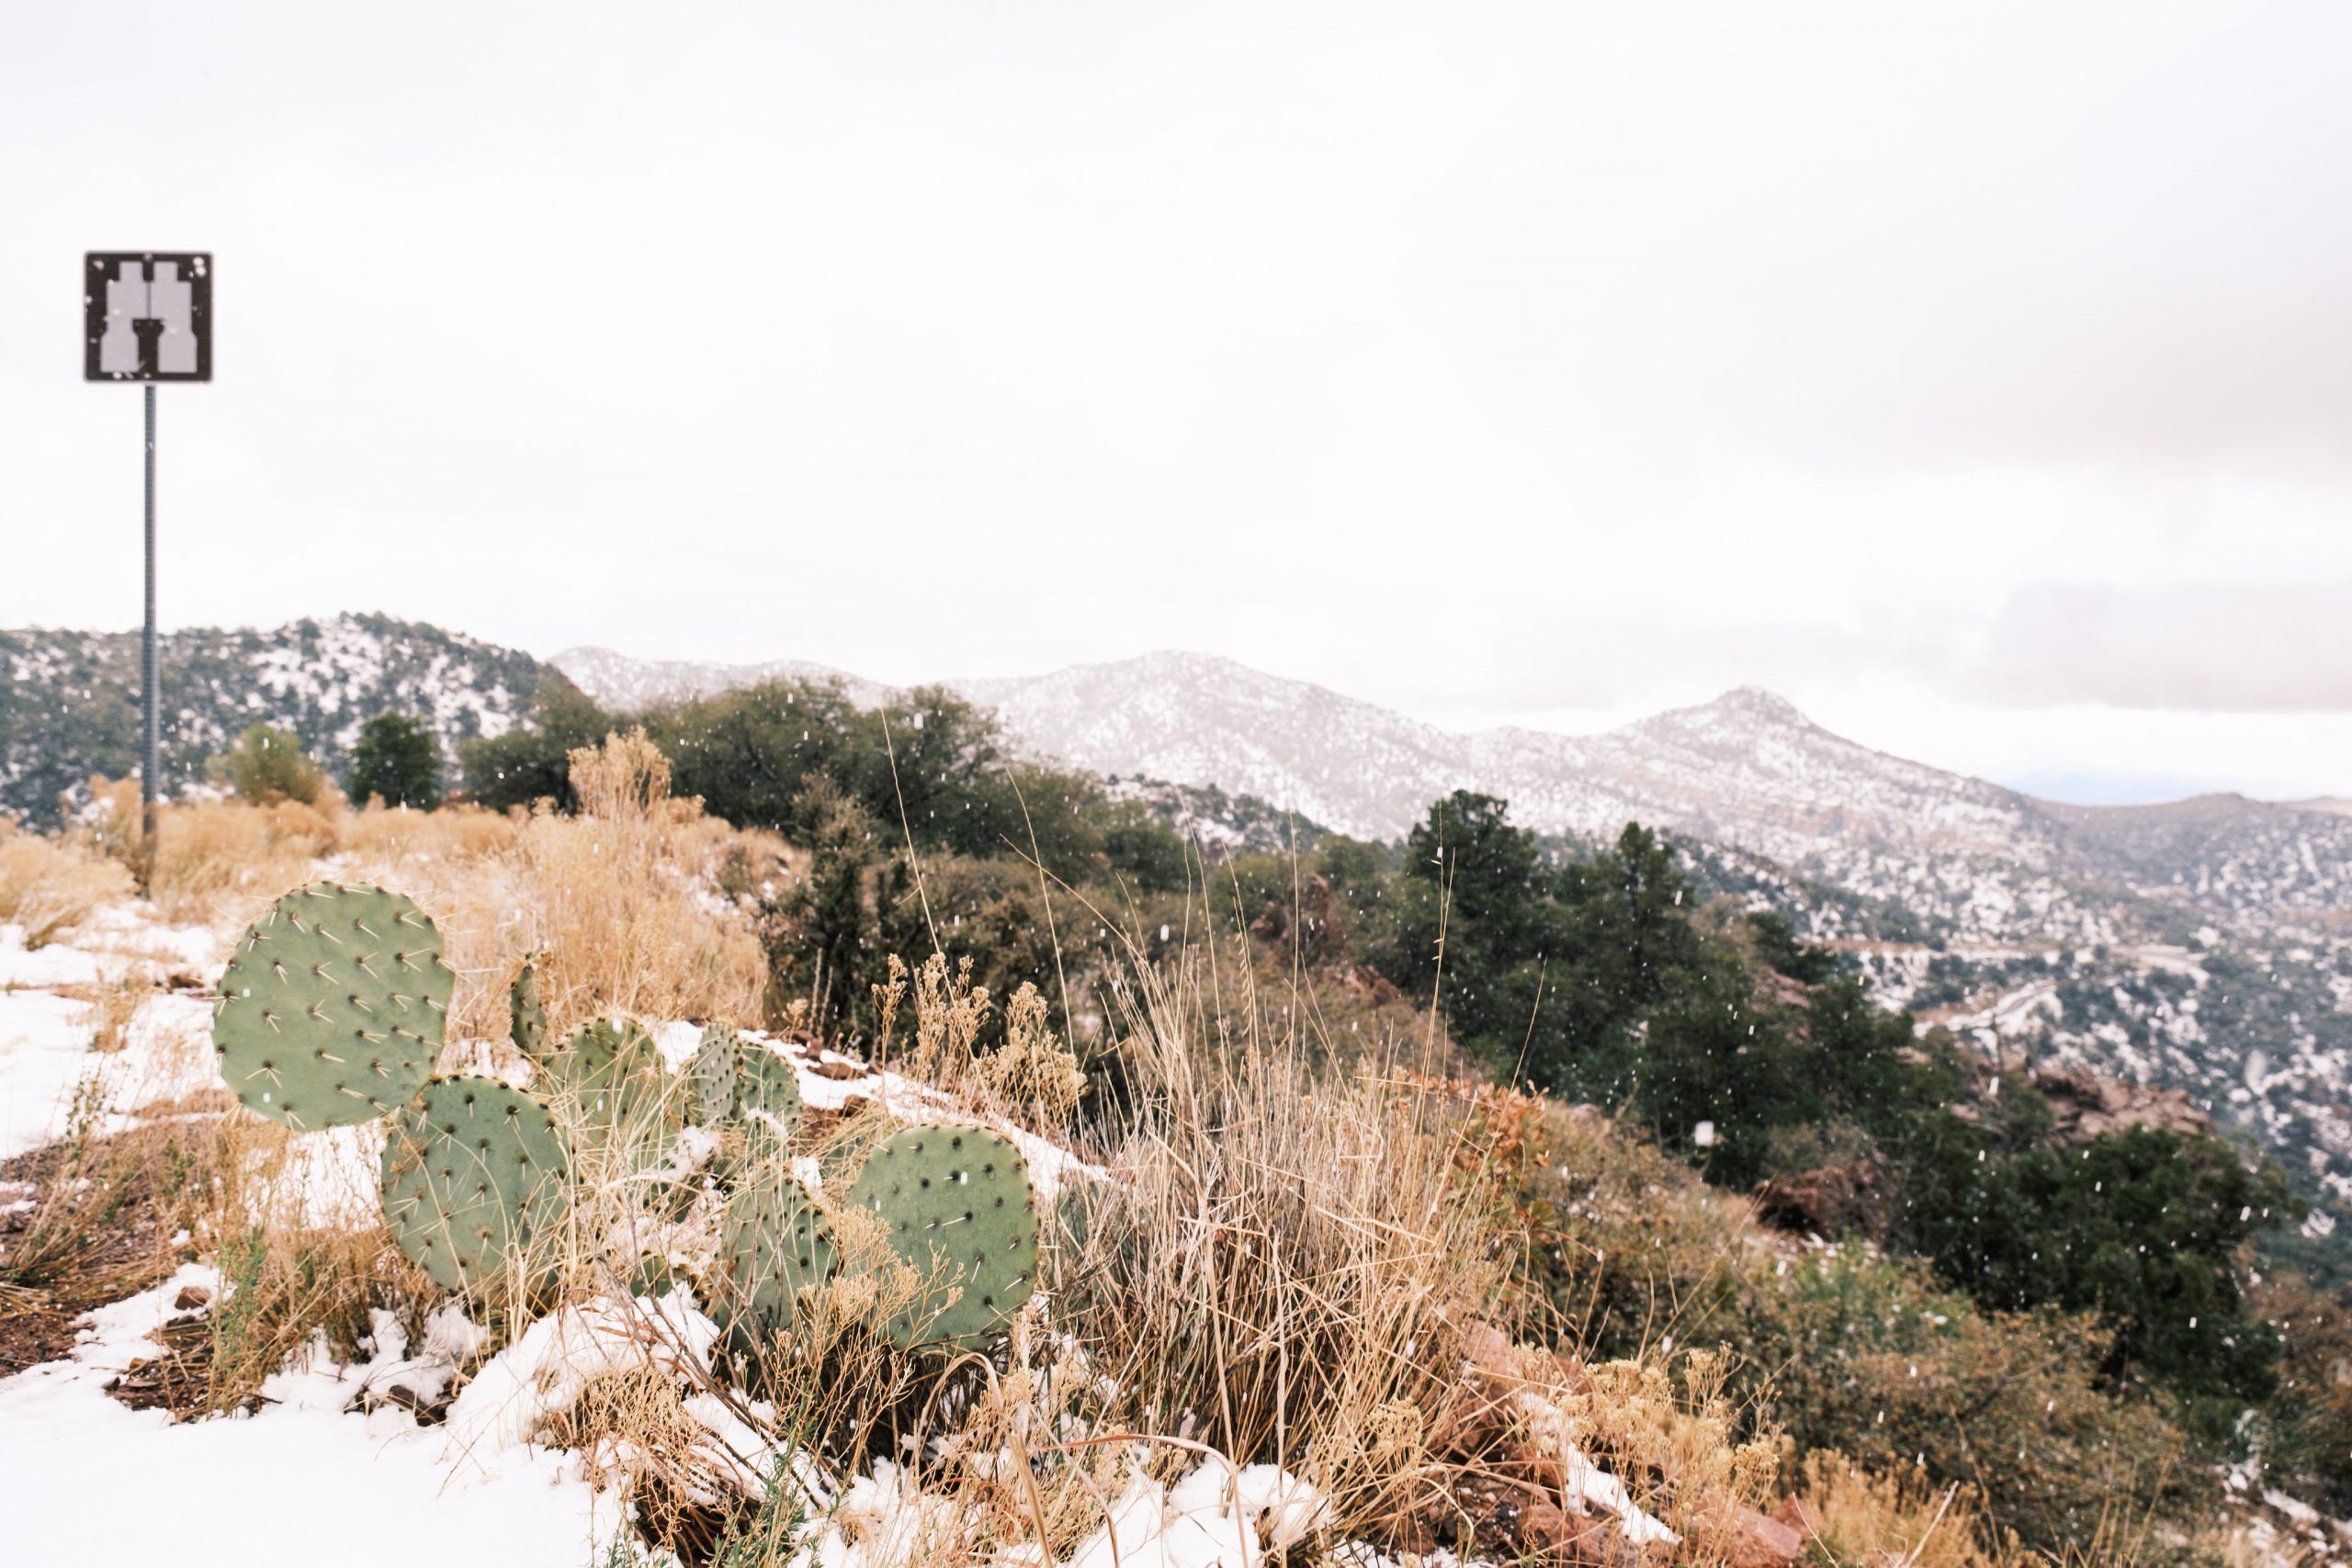 Photograph of cacti covered in snow in the foreground with snow covered mountains in the background.